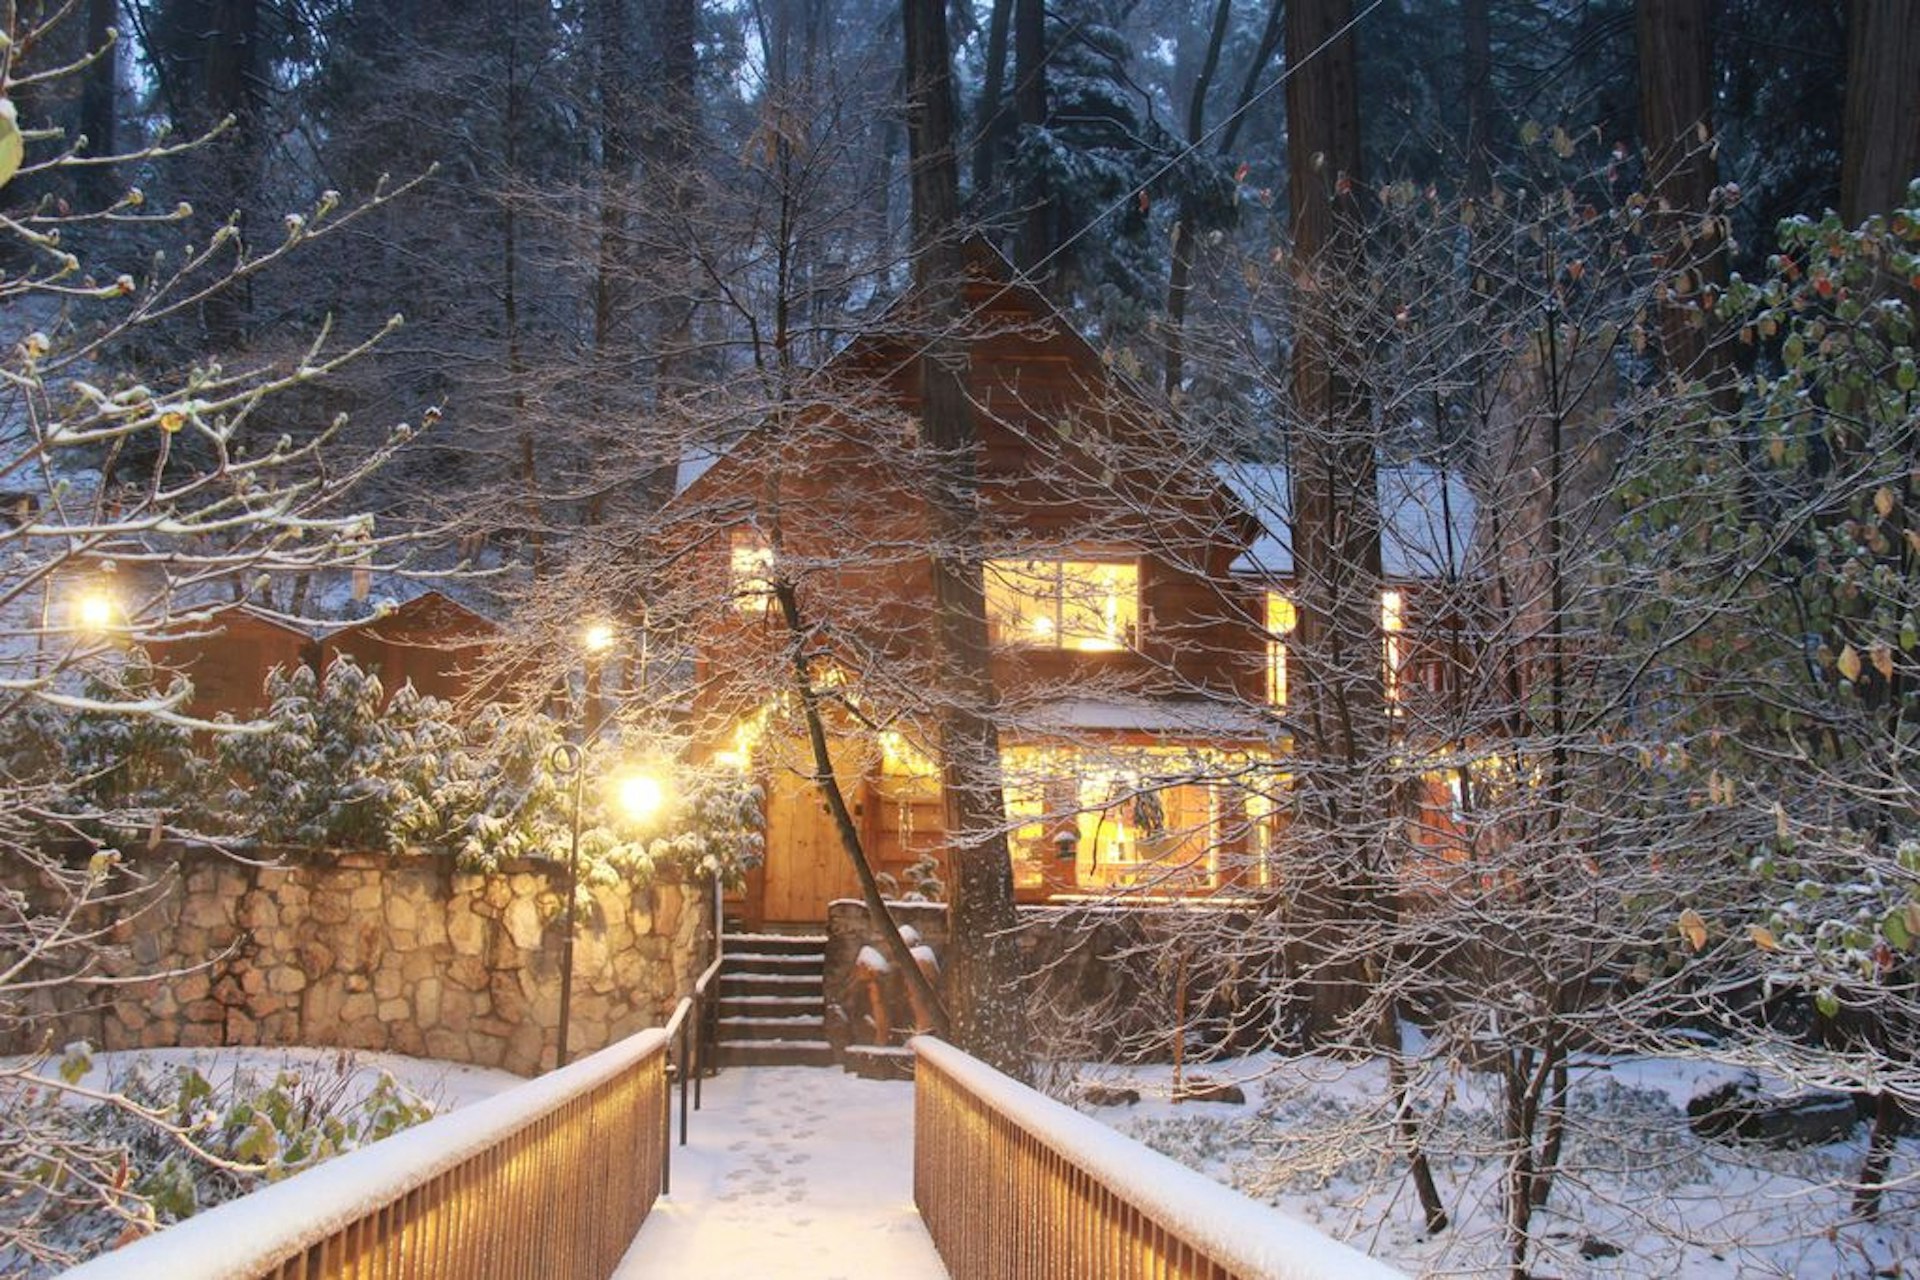 A cabin in the woods at night, lit up and covered with snow 